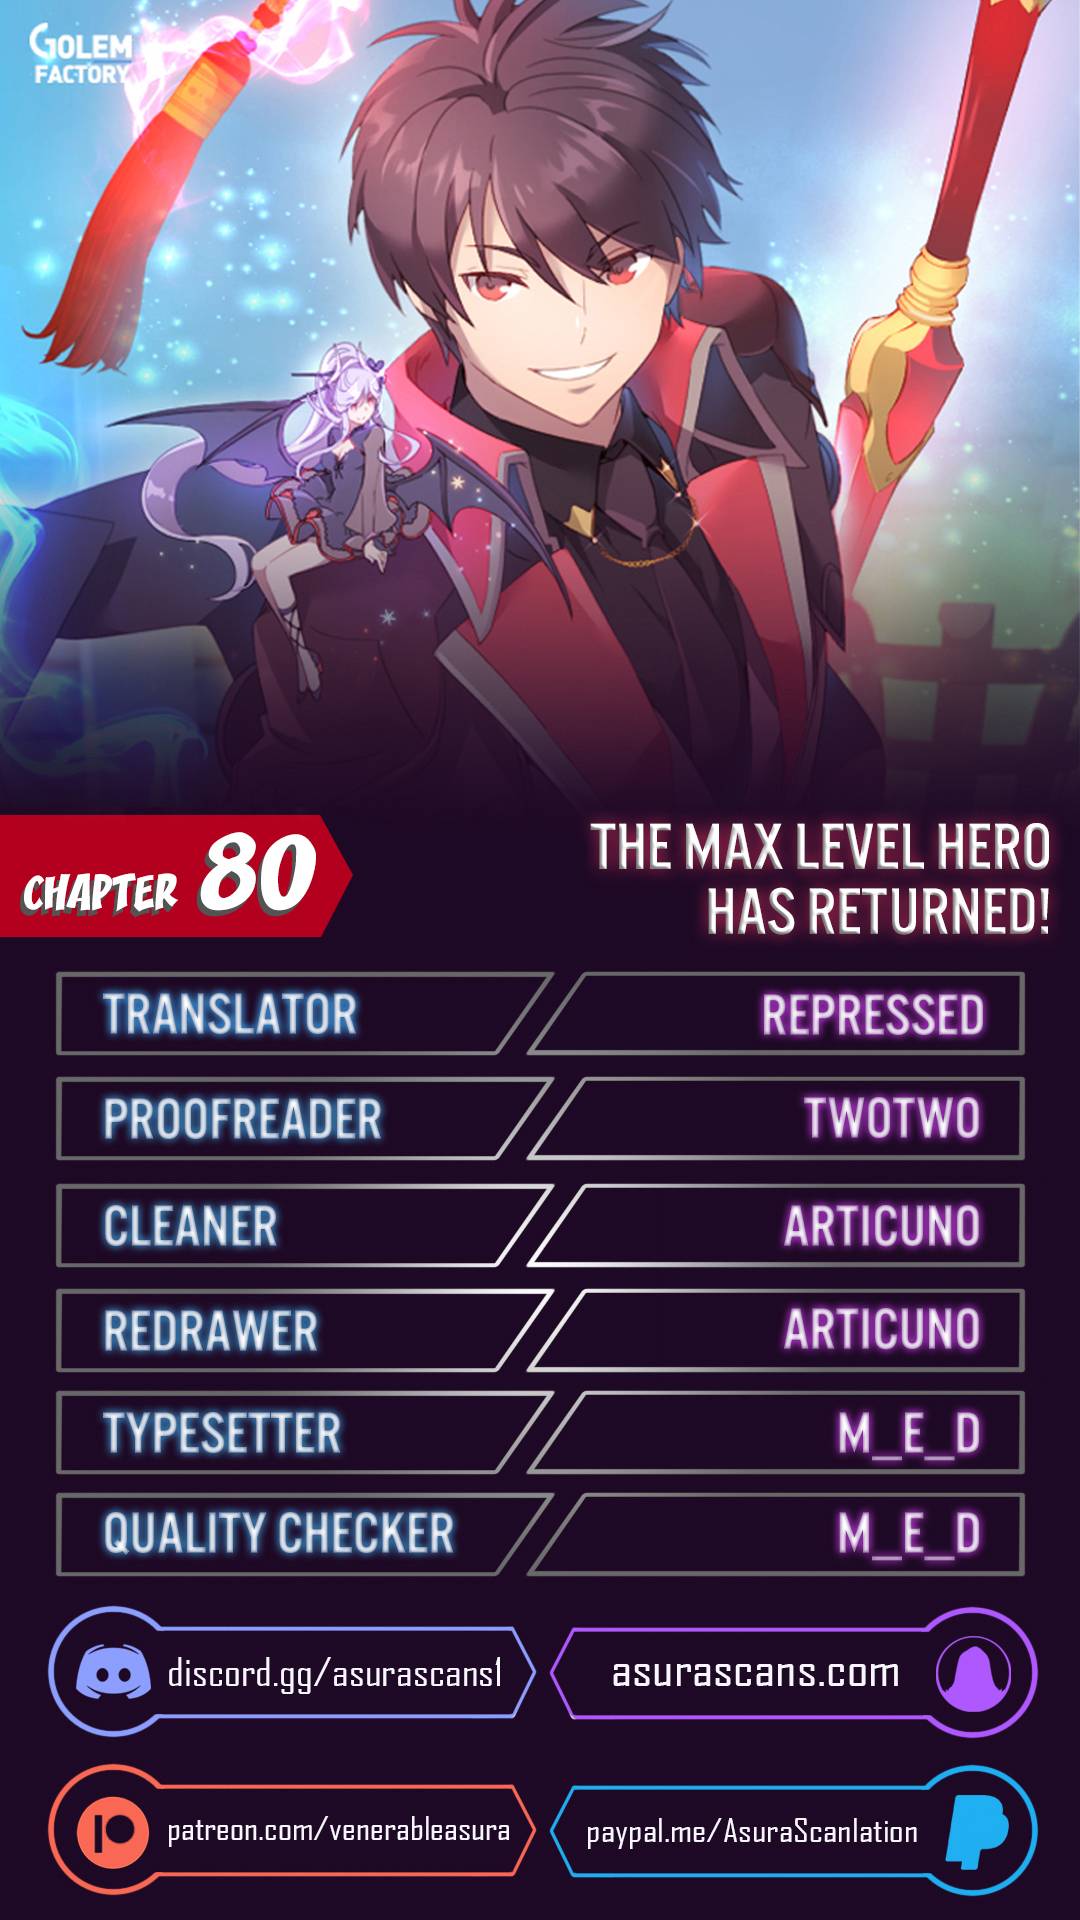 The MAX leveled hero will return! Chapter 80